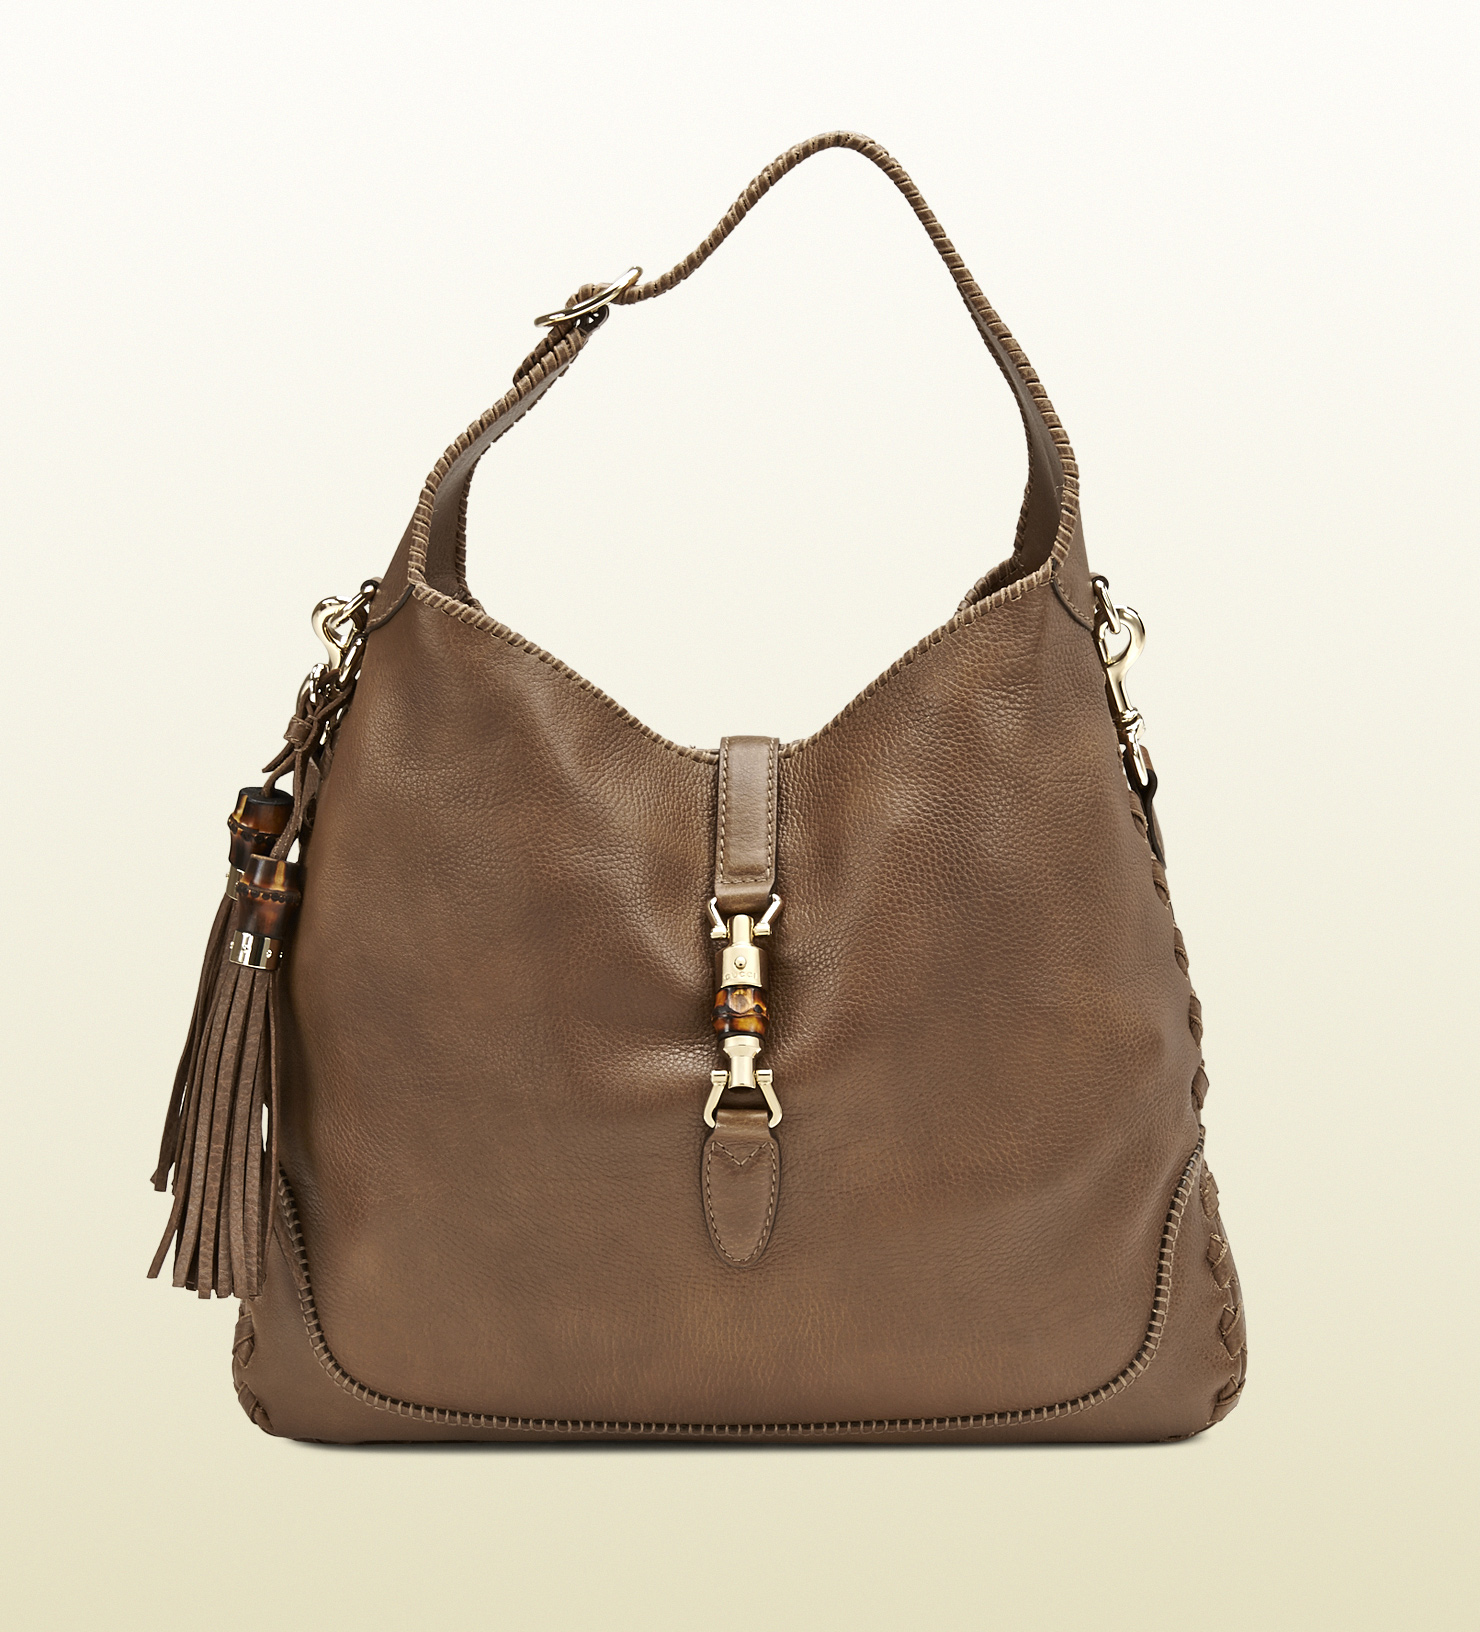 Gucci New Jackie Leather Shoulder Bag in Brown - Lyst